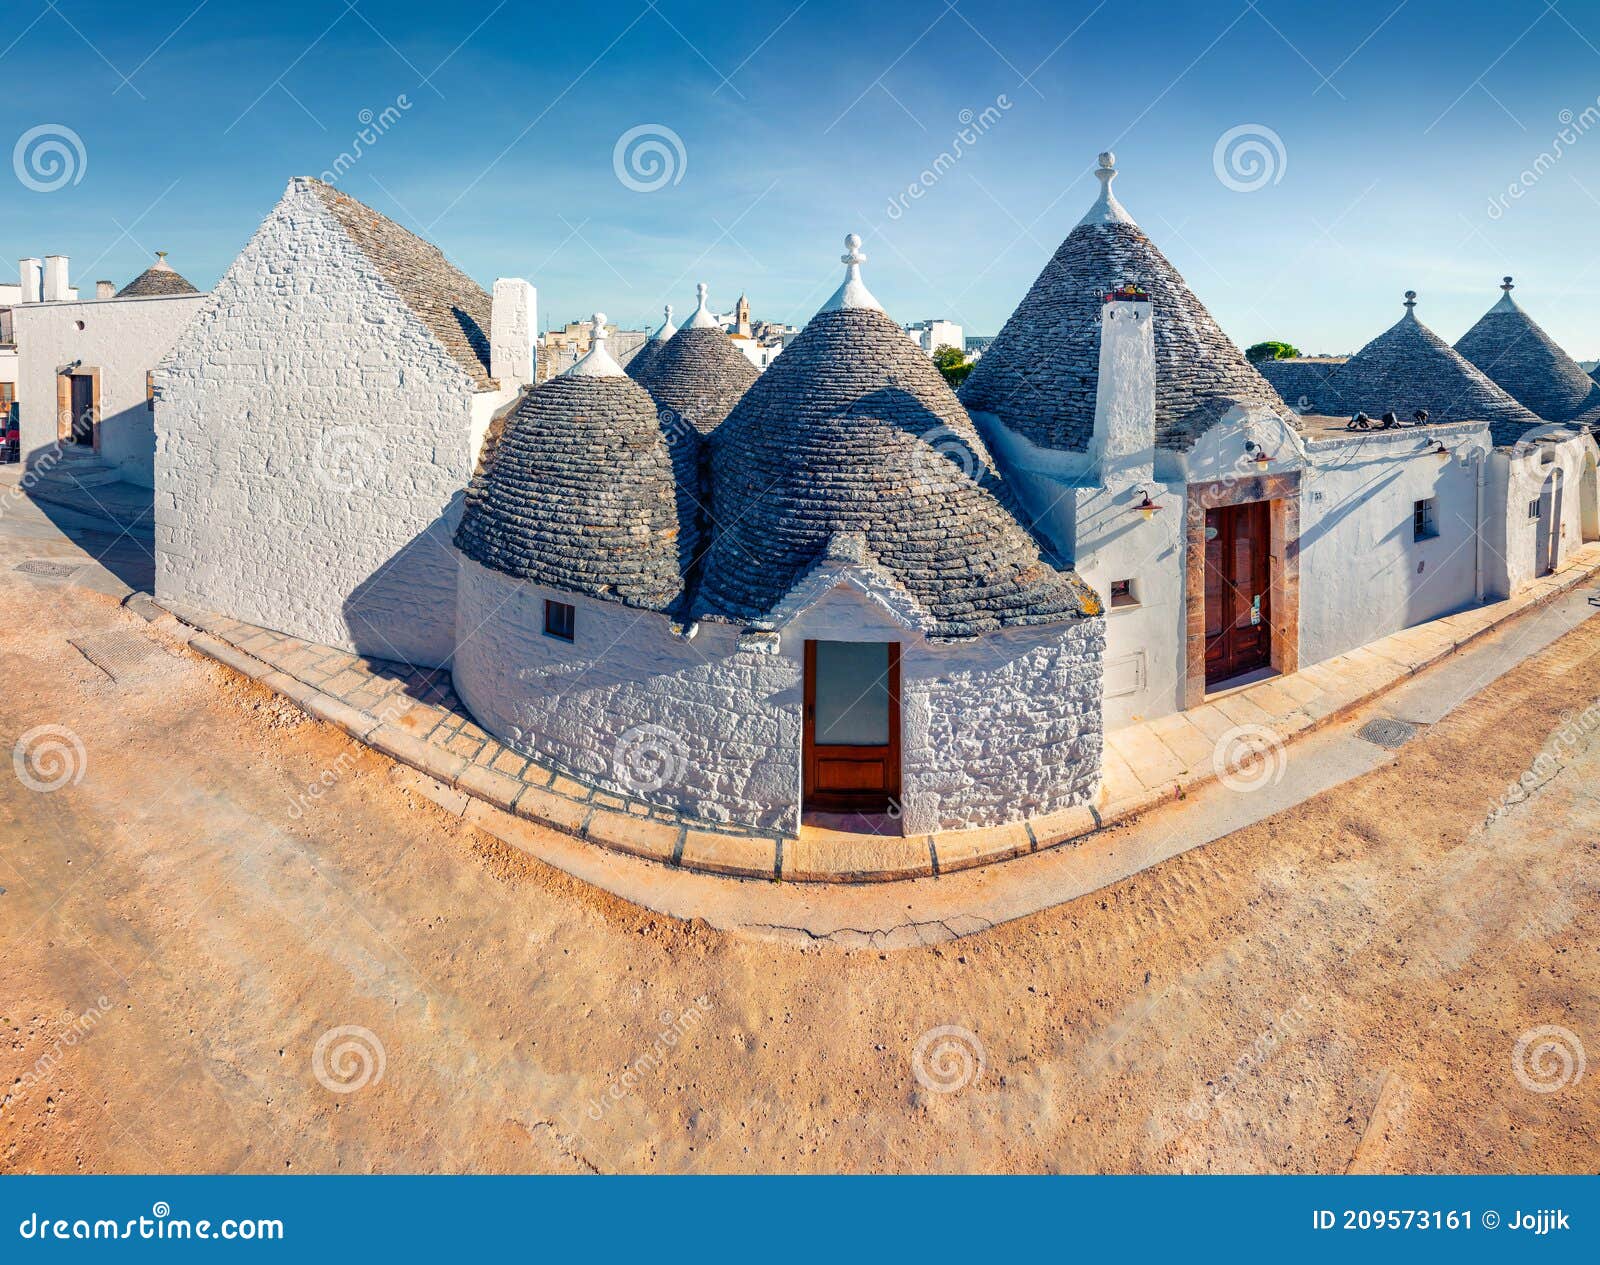 incredible morning view of strret with trullo trulli -  traditional apulian dry stone hut with a conical roof. sunny spring city